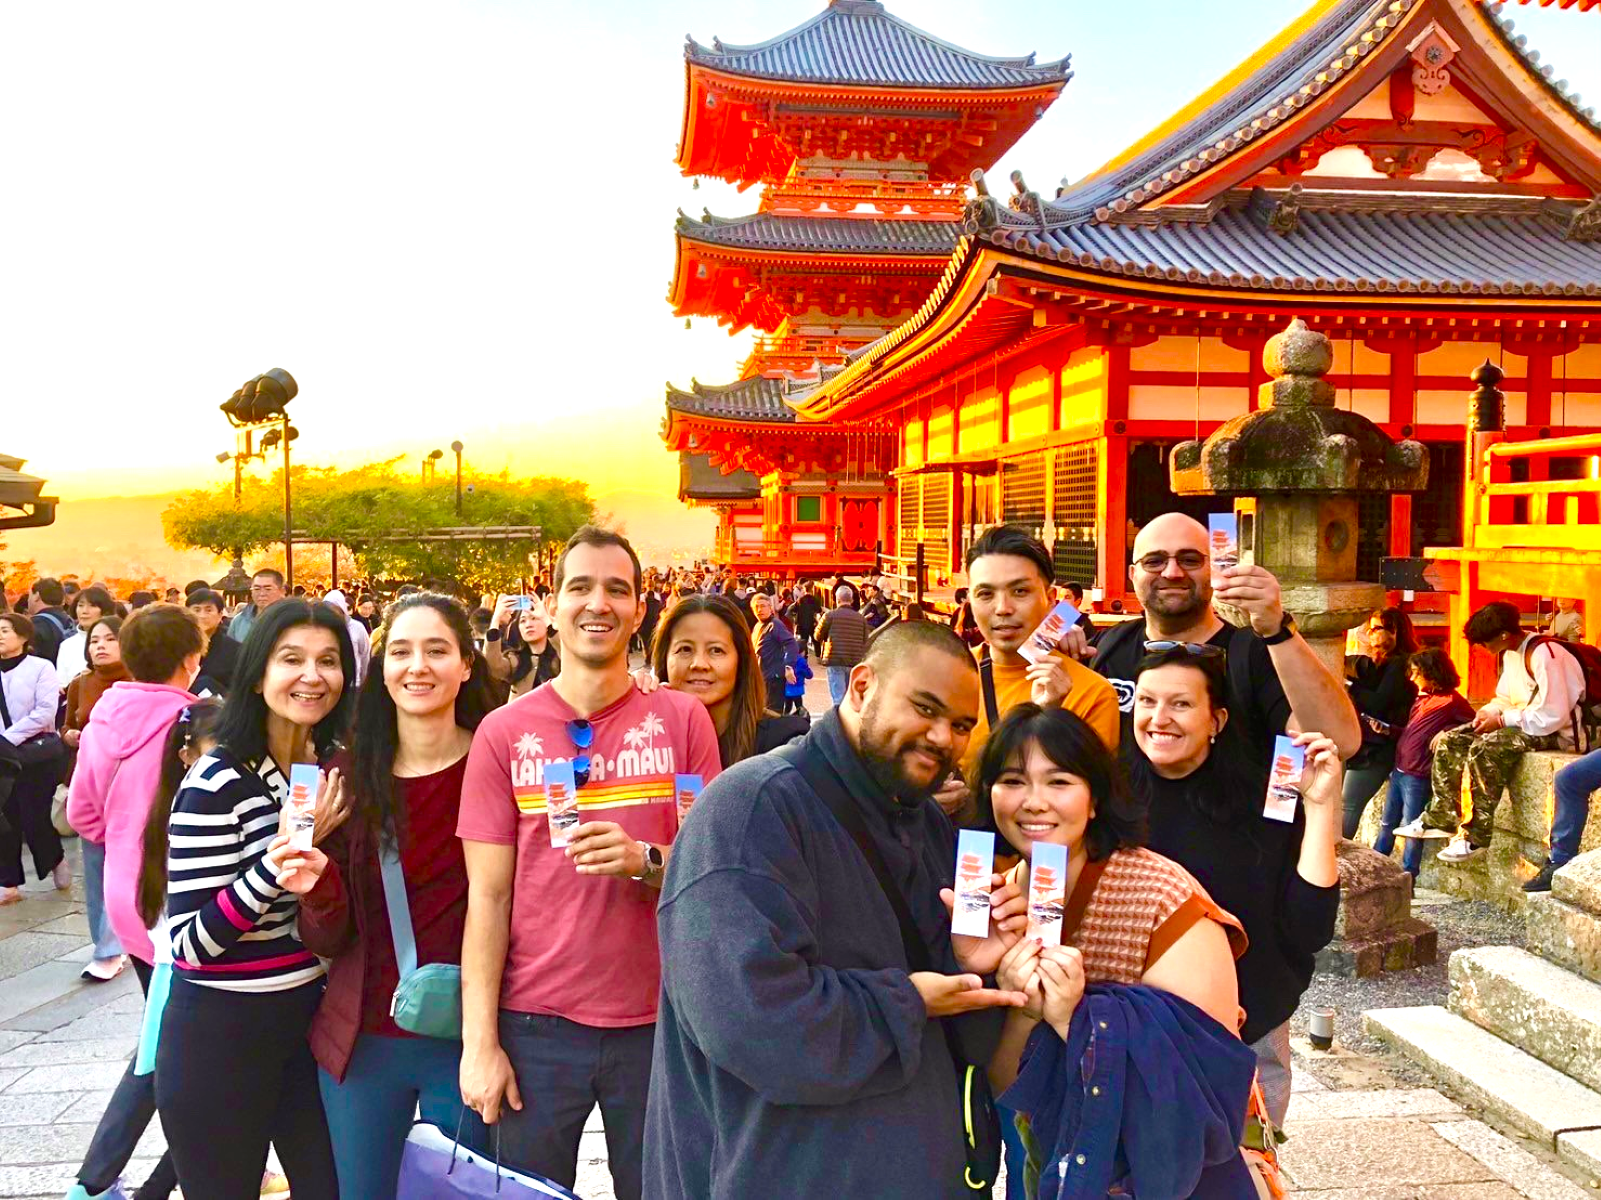 Complete Kyoto Tour in One Day! Visit All 12 Popular Sights!